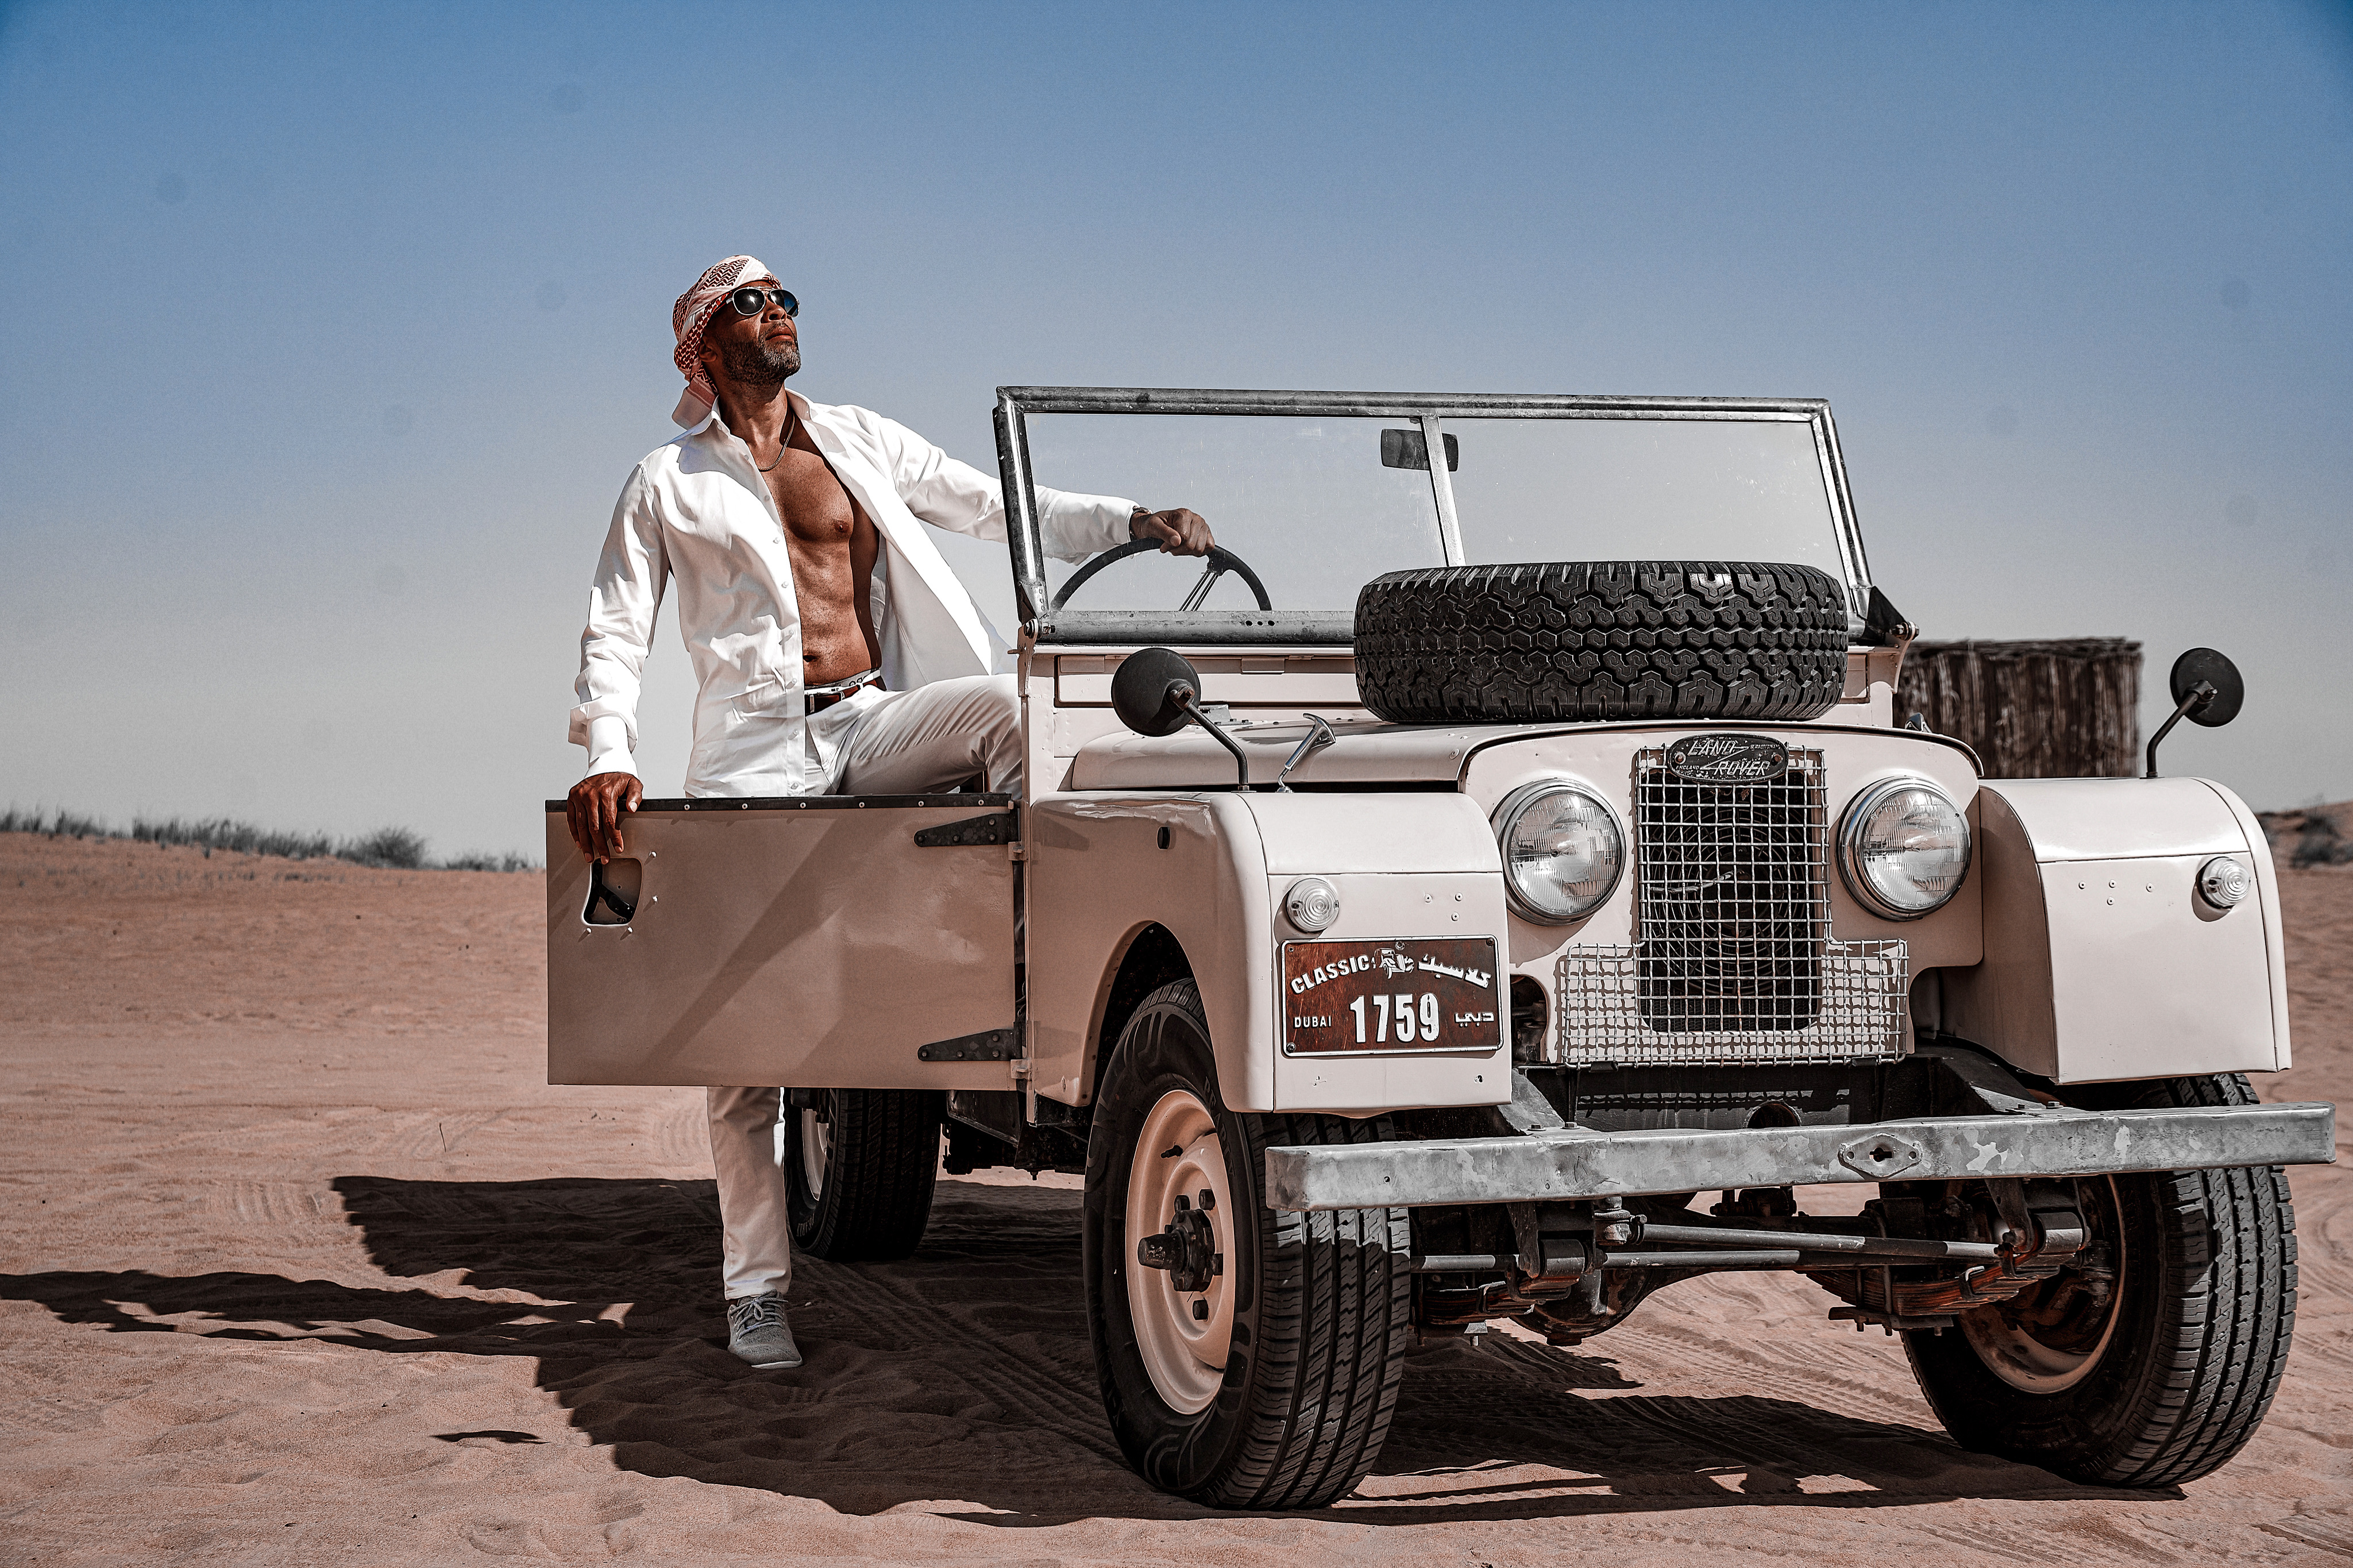 In the desert, a man is striking a pose next to a vintage jeep during a luxury car photoshoot in Dubai.